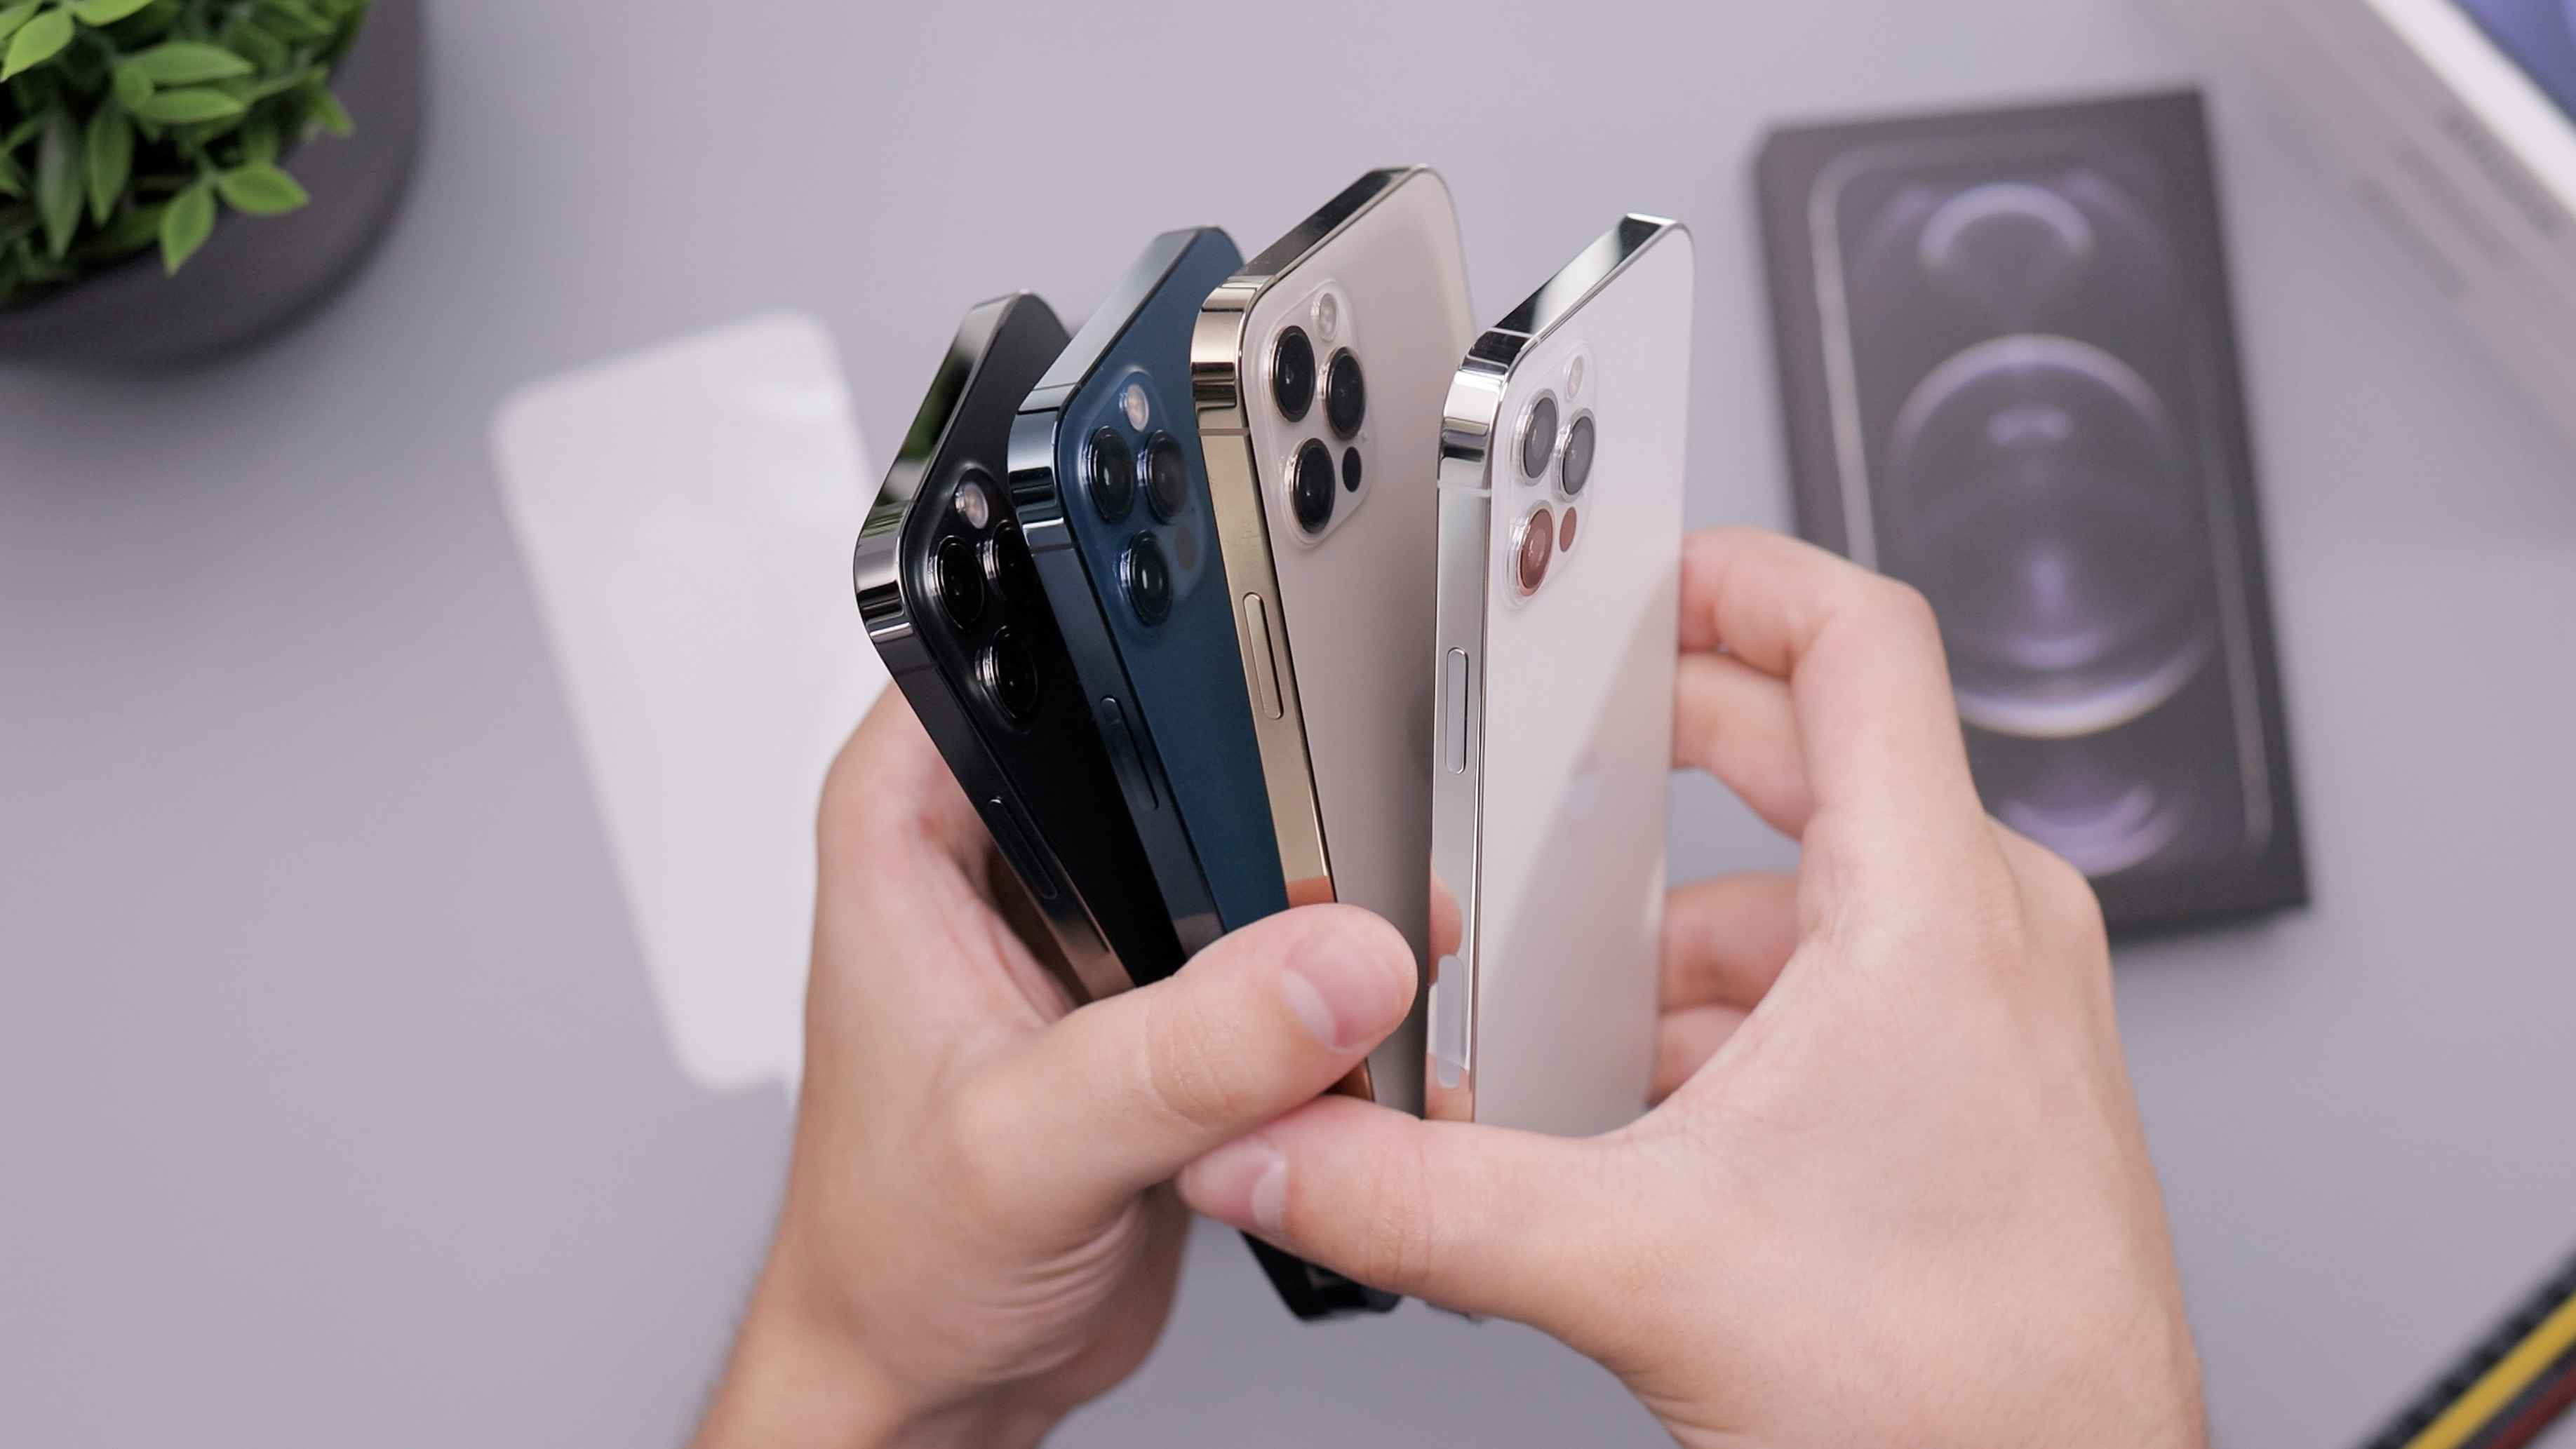 10 Proven Ways to Optimize Your iPhone's Storage Space and Enjoy Maximum Performance